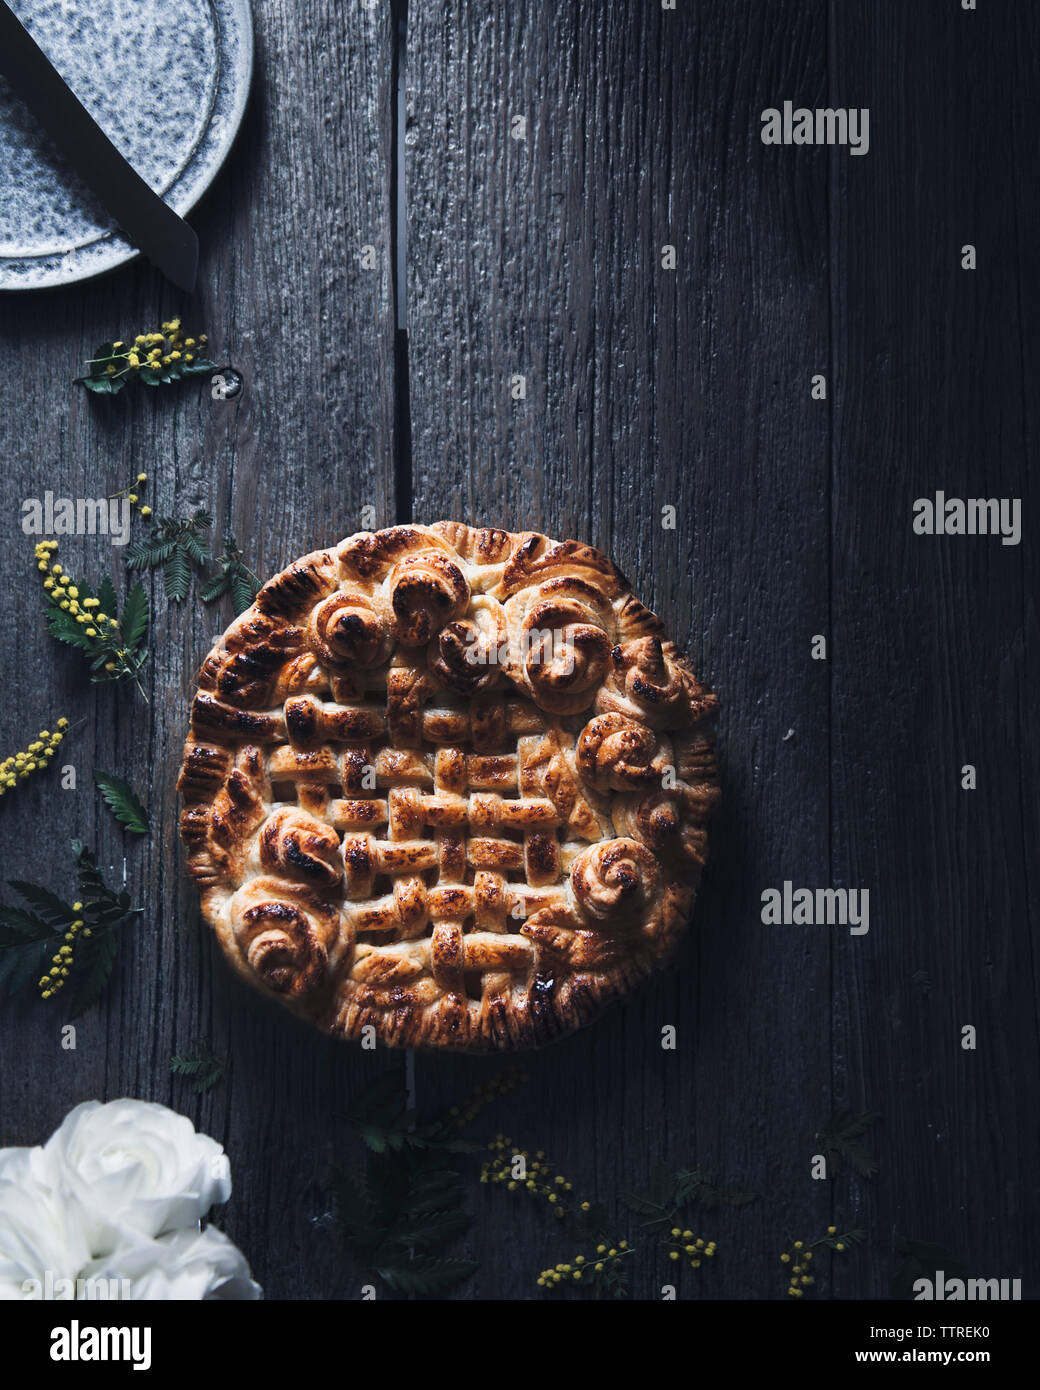 Overhead view of freshly baked apple pie on wooden table Stock Photo